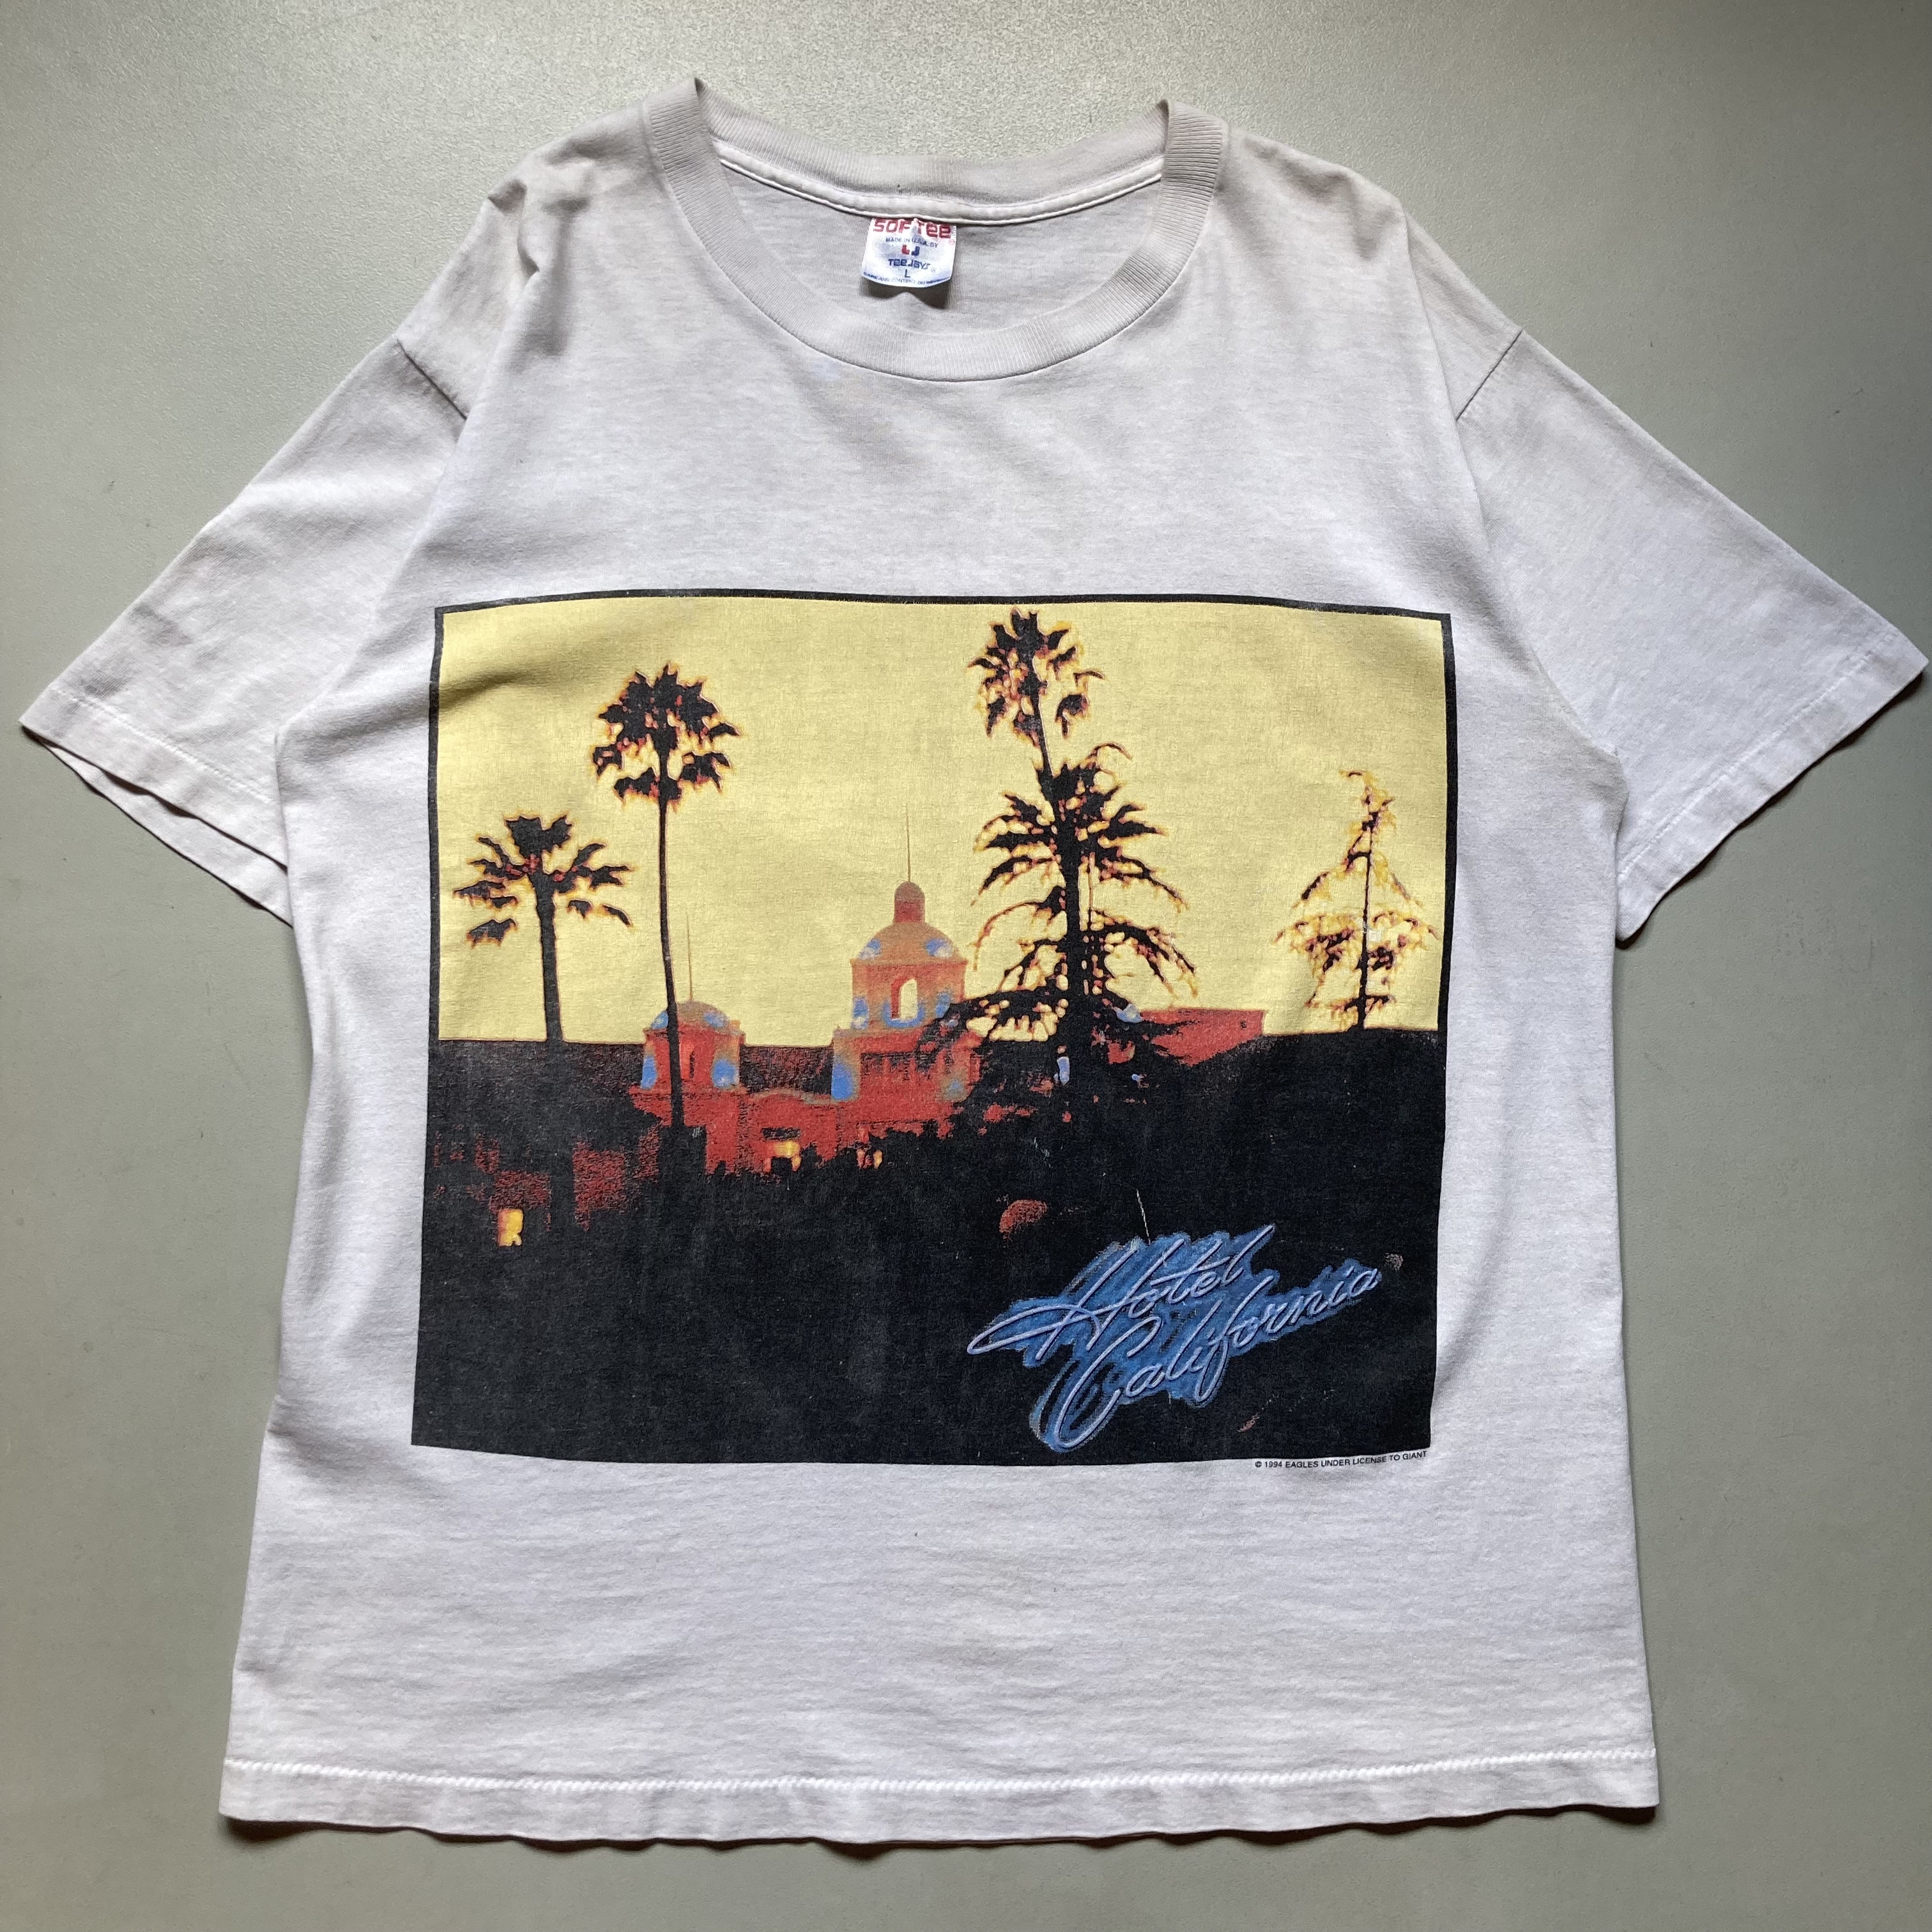 90s eagles band T-shirt 「Hotel California 」 「Hell freeze over ...